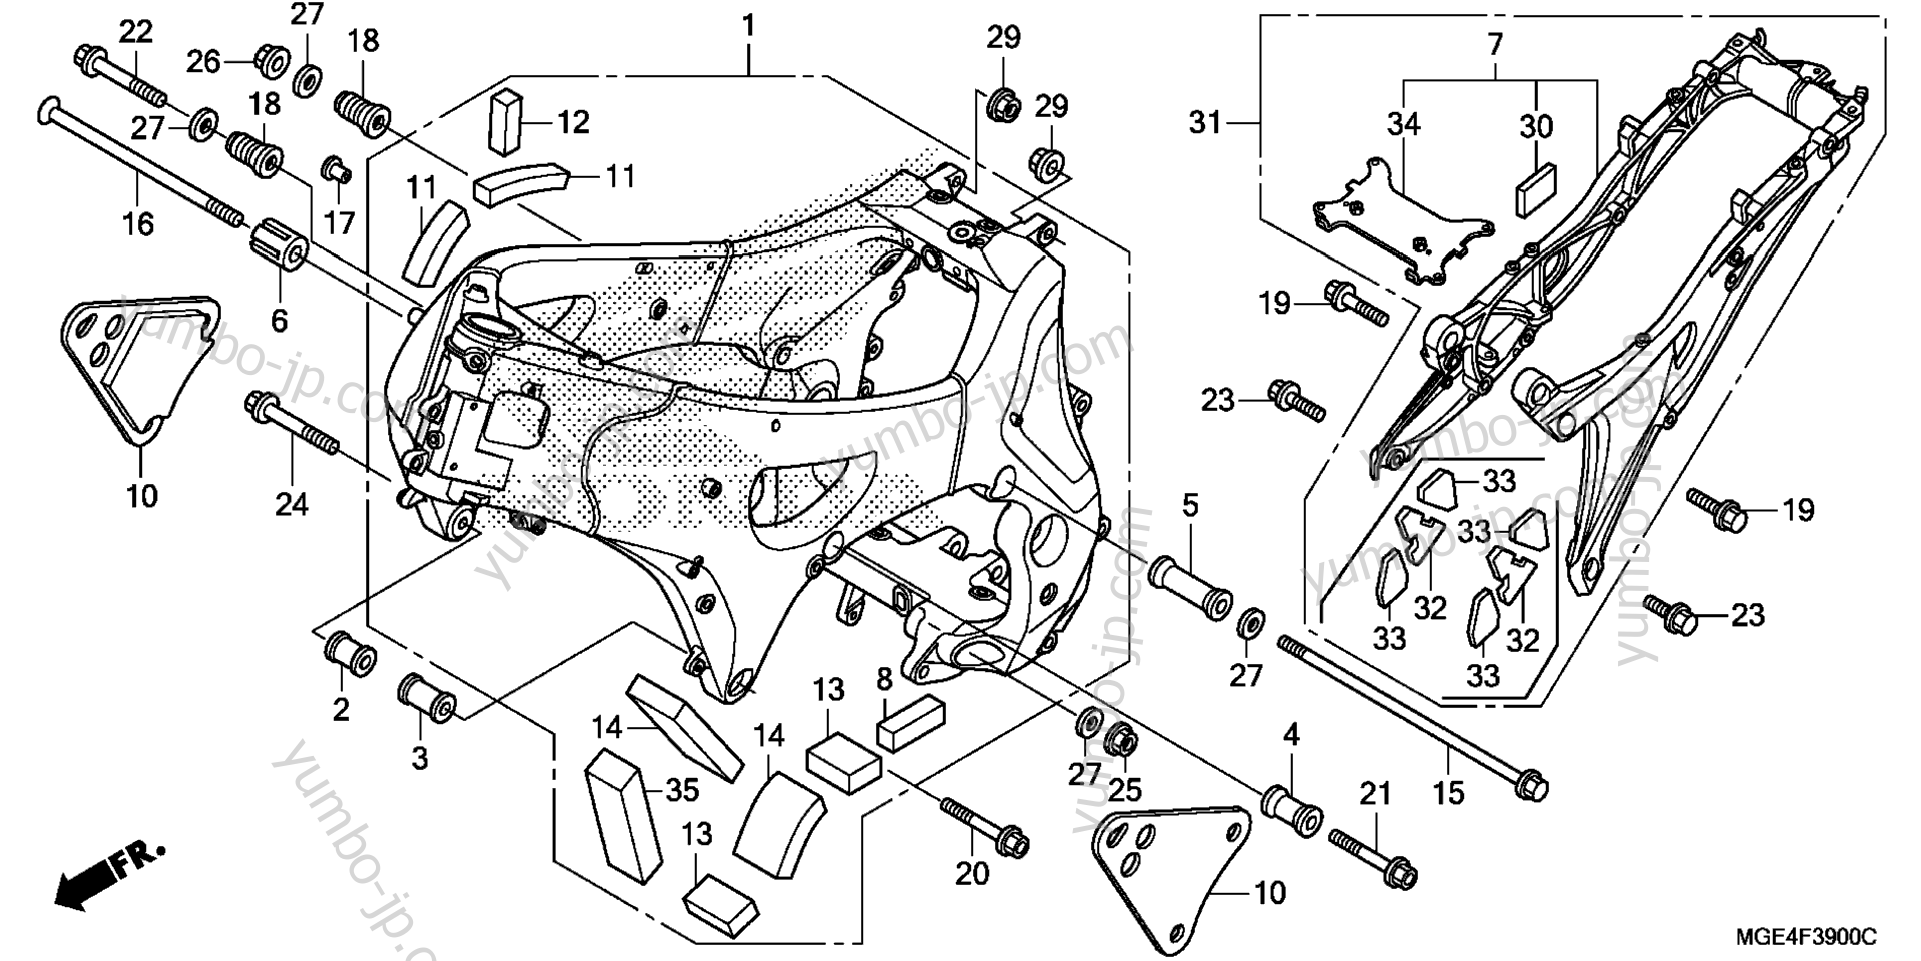 FRAME for motorcycles HONDA VFR1200F AC 2010 year